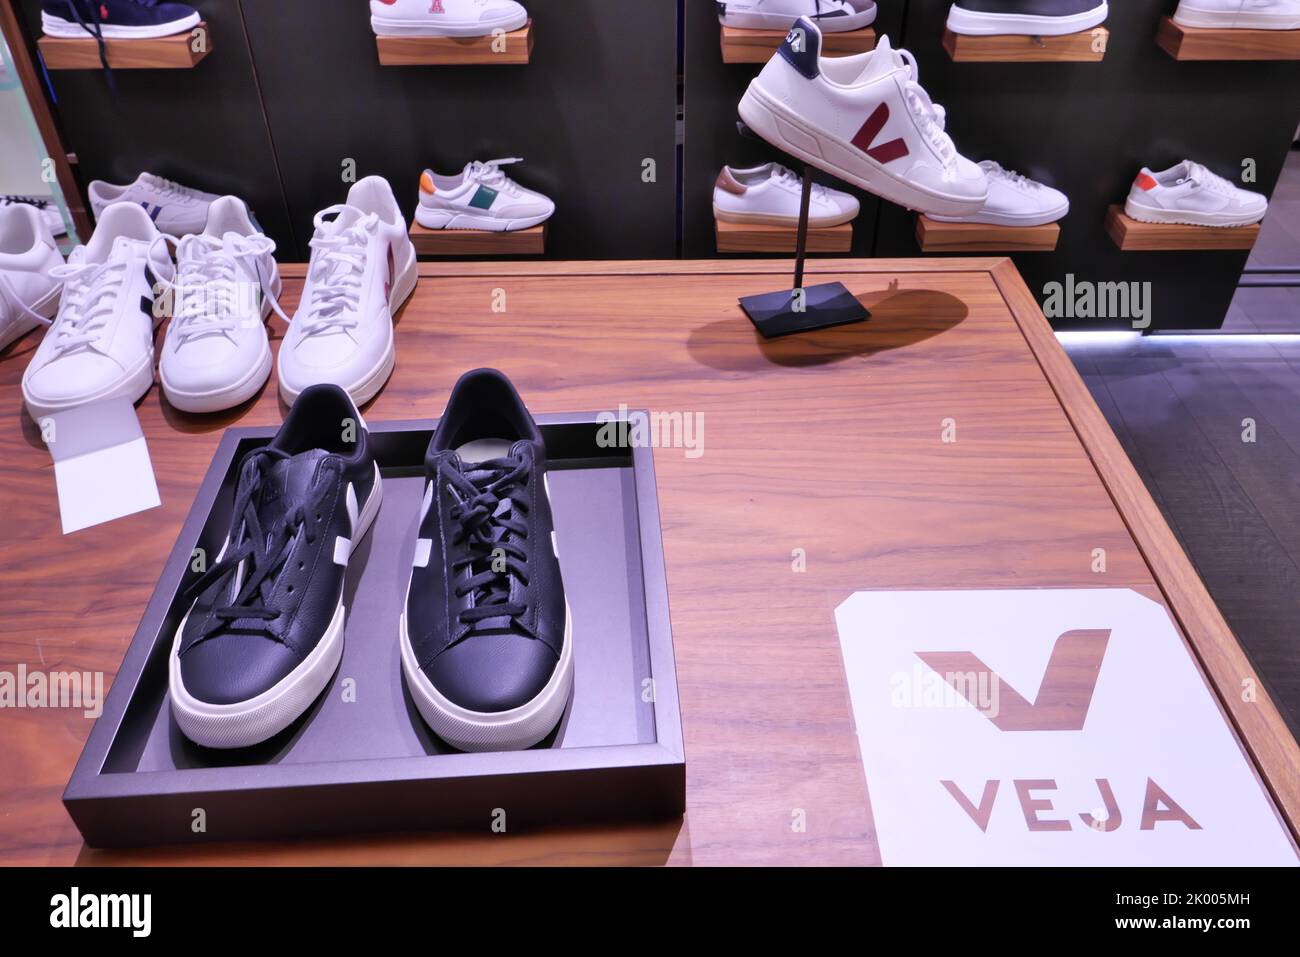 VEJA SHOES ON DISPLAY INSIDE A FASHION STRORE Stock Photo